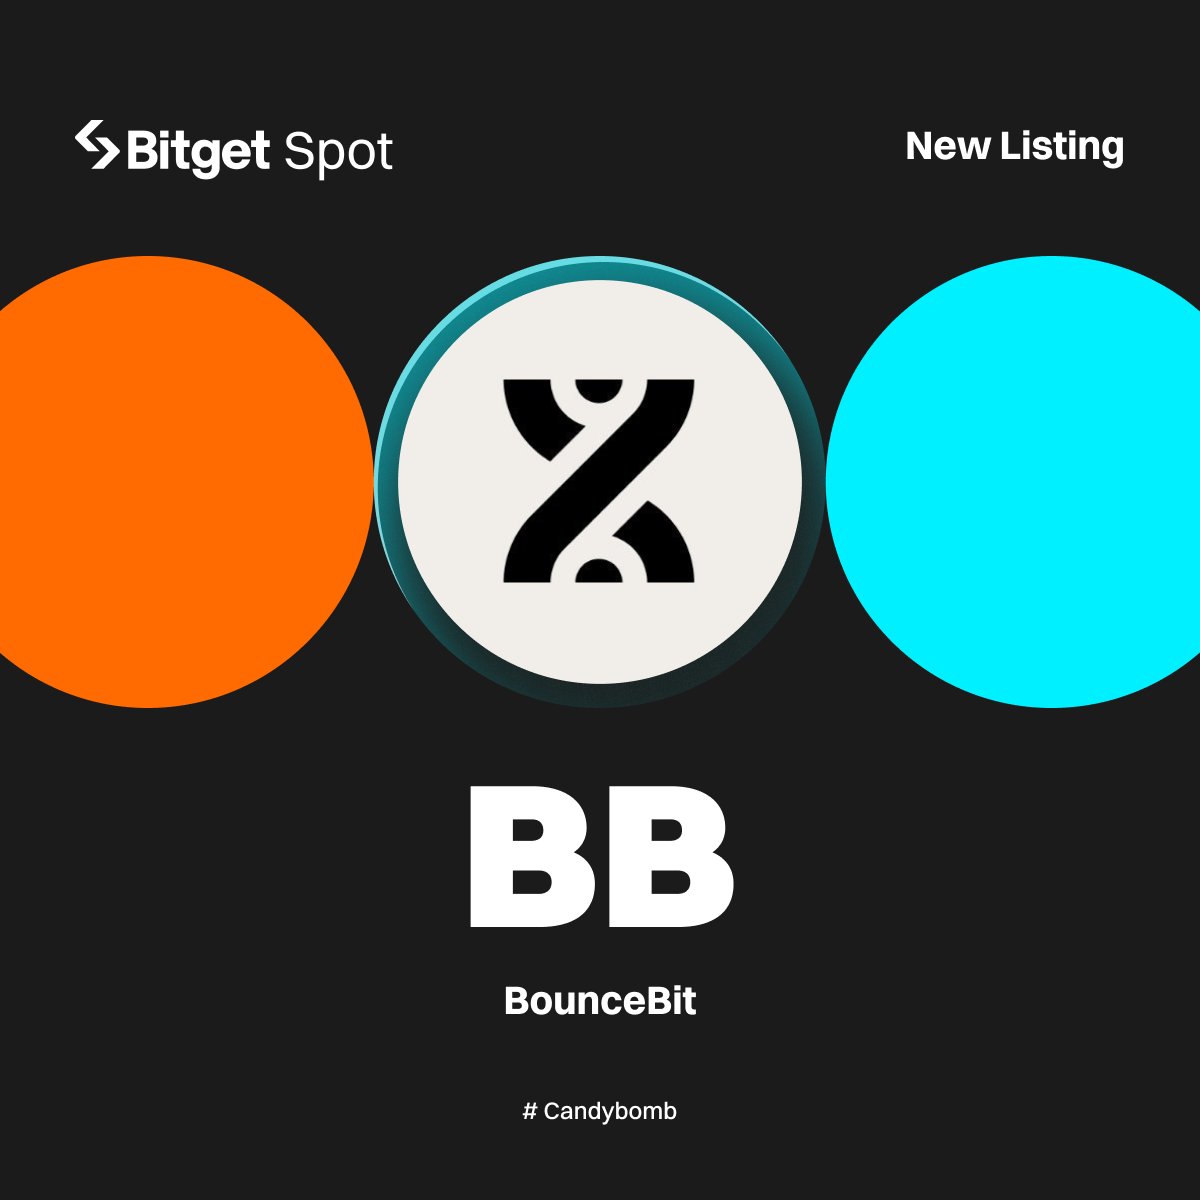 Initial Listing - $BB @bounce_bit 

#Bitget will list BB/USDT with $40,000 worth of $BB up for grabs! #BBlistBitget

🔹Deposit: opened 
🔹Trading starts: May 13, 10:00 AM (UTC) 

More details: bitget.com/en/support/art…